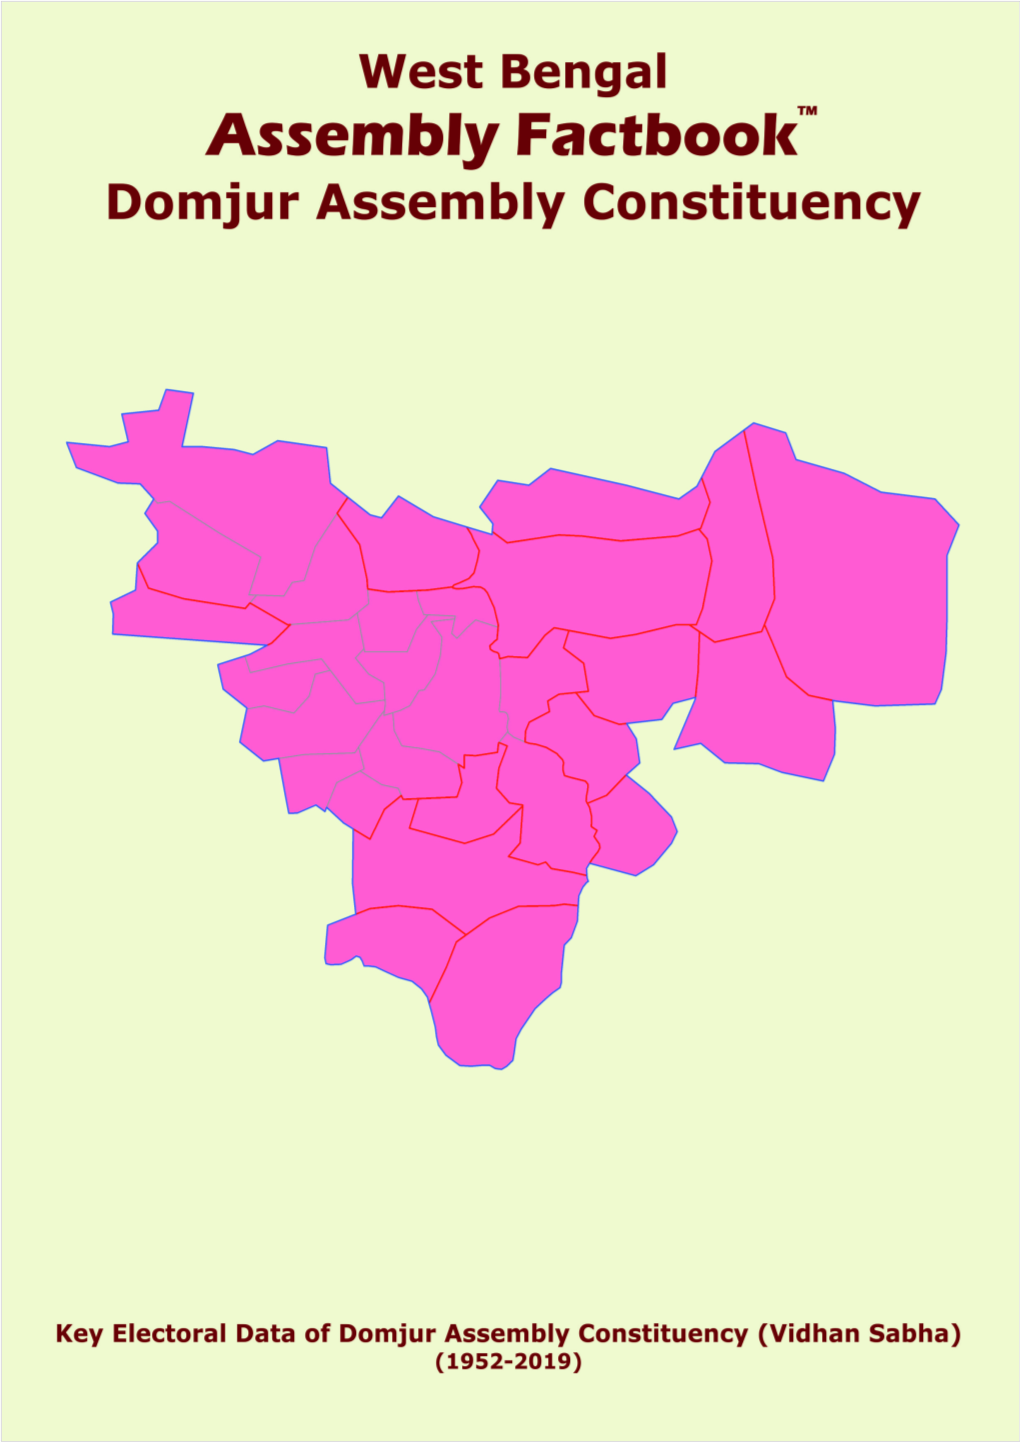 Domjur Assembly West Bengal Factbook | Key Electoral Data of Domjur Assembly Constituency | Sample Book